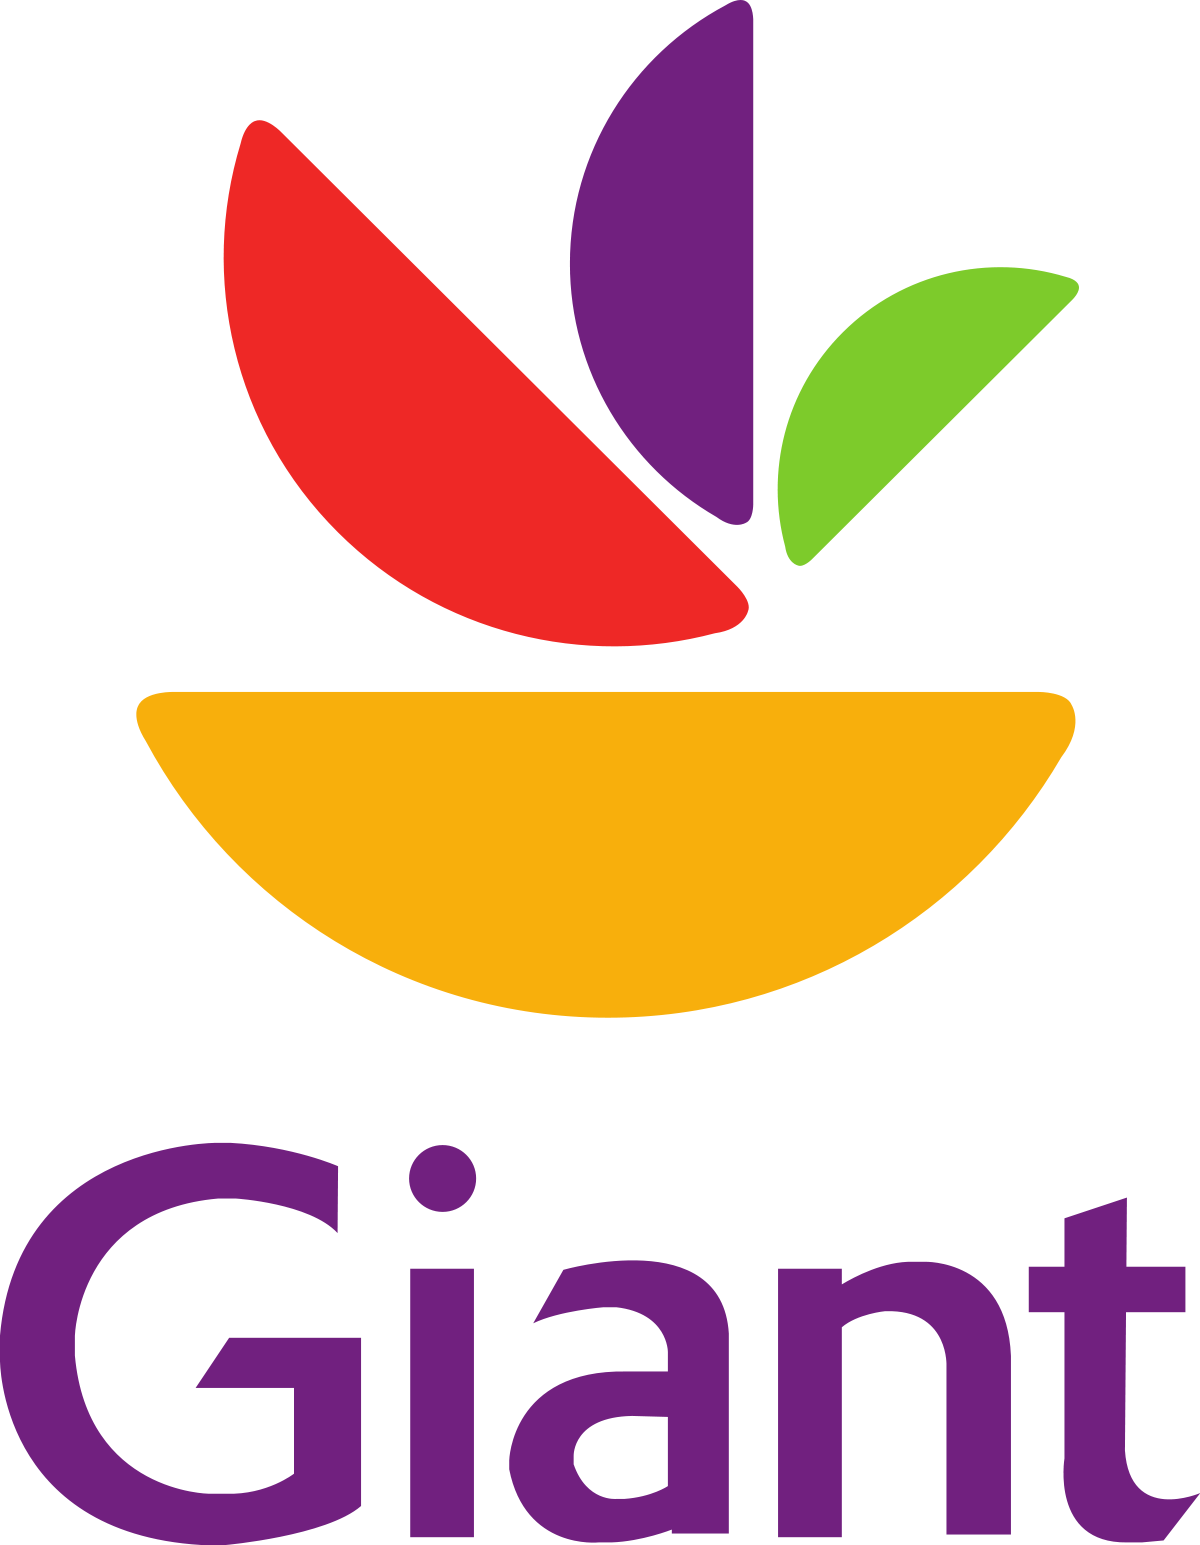 File:Giant Food logo.svg - Wikimedia Commons